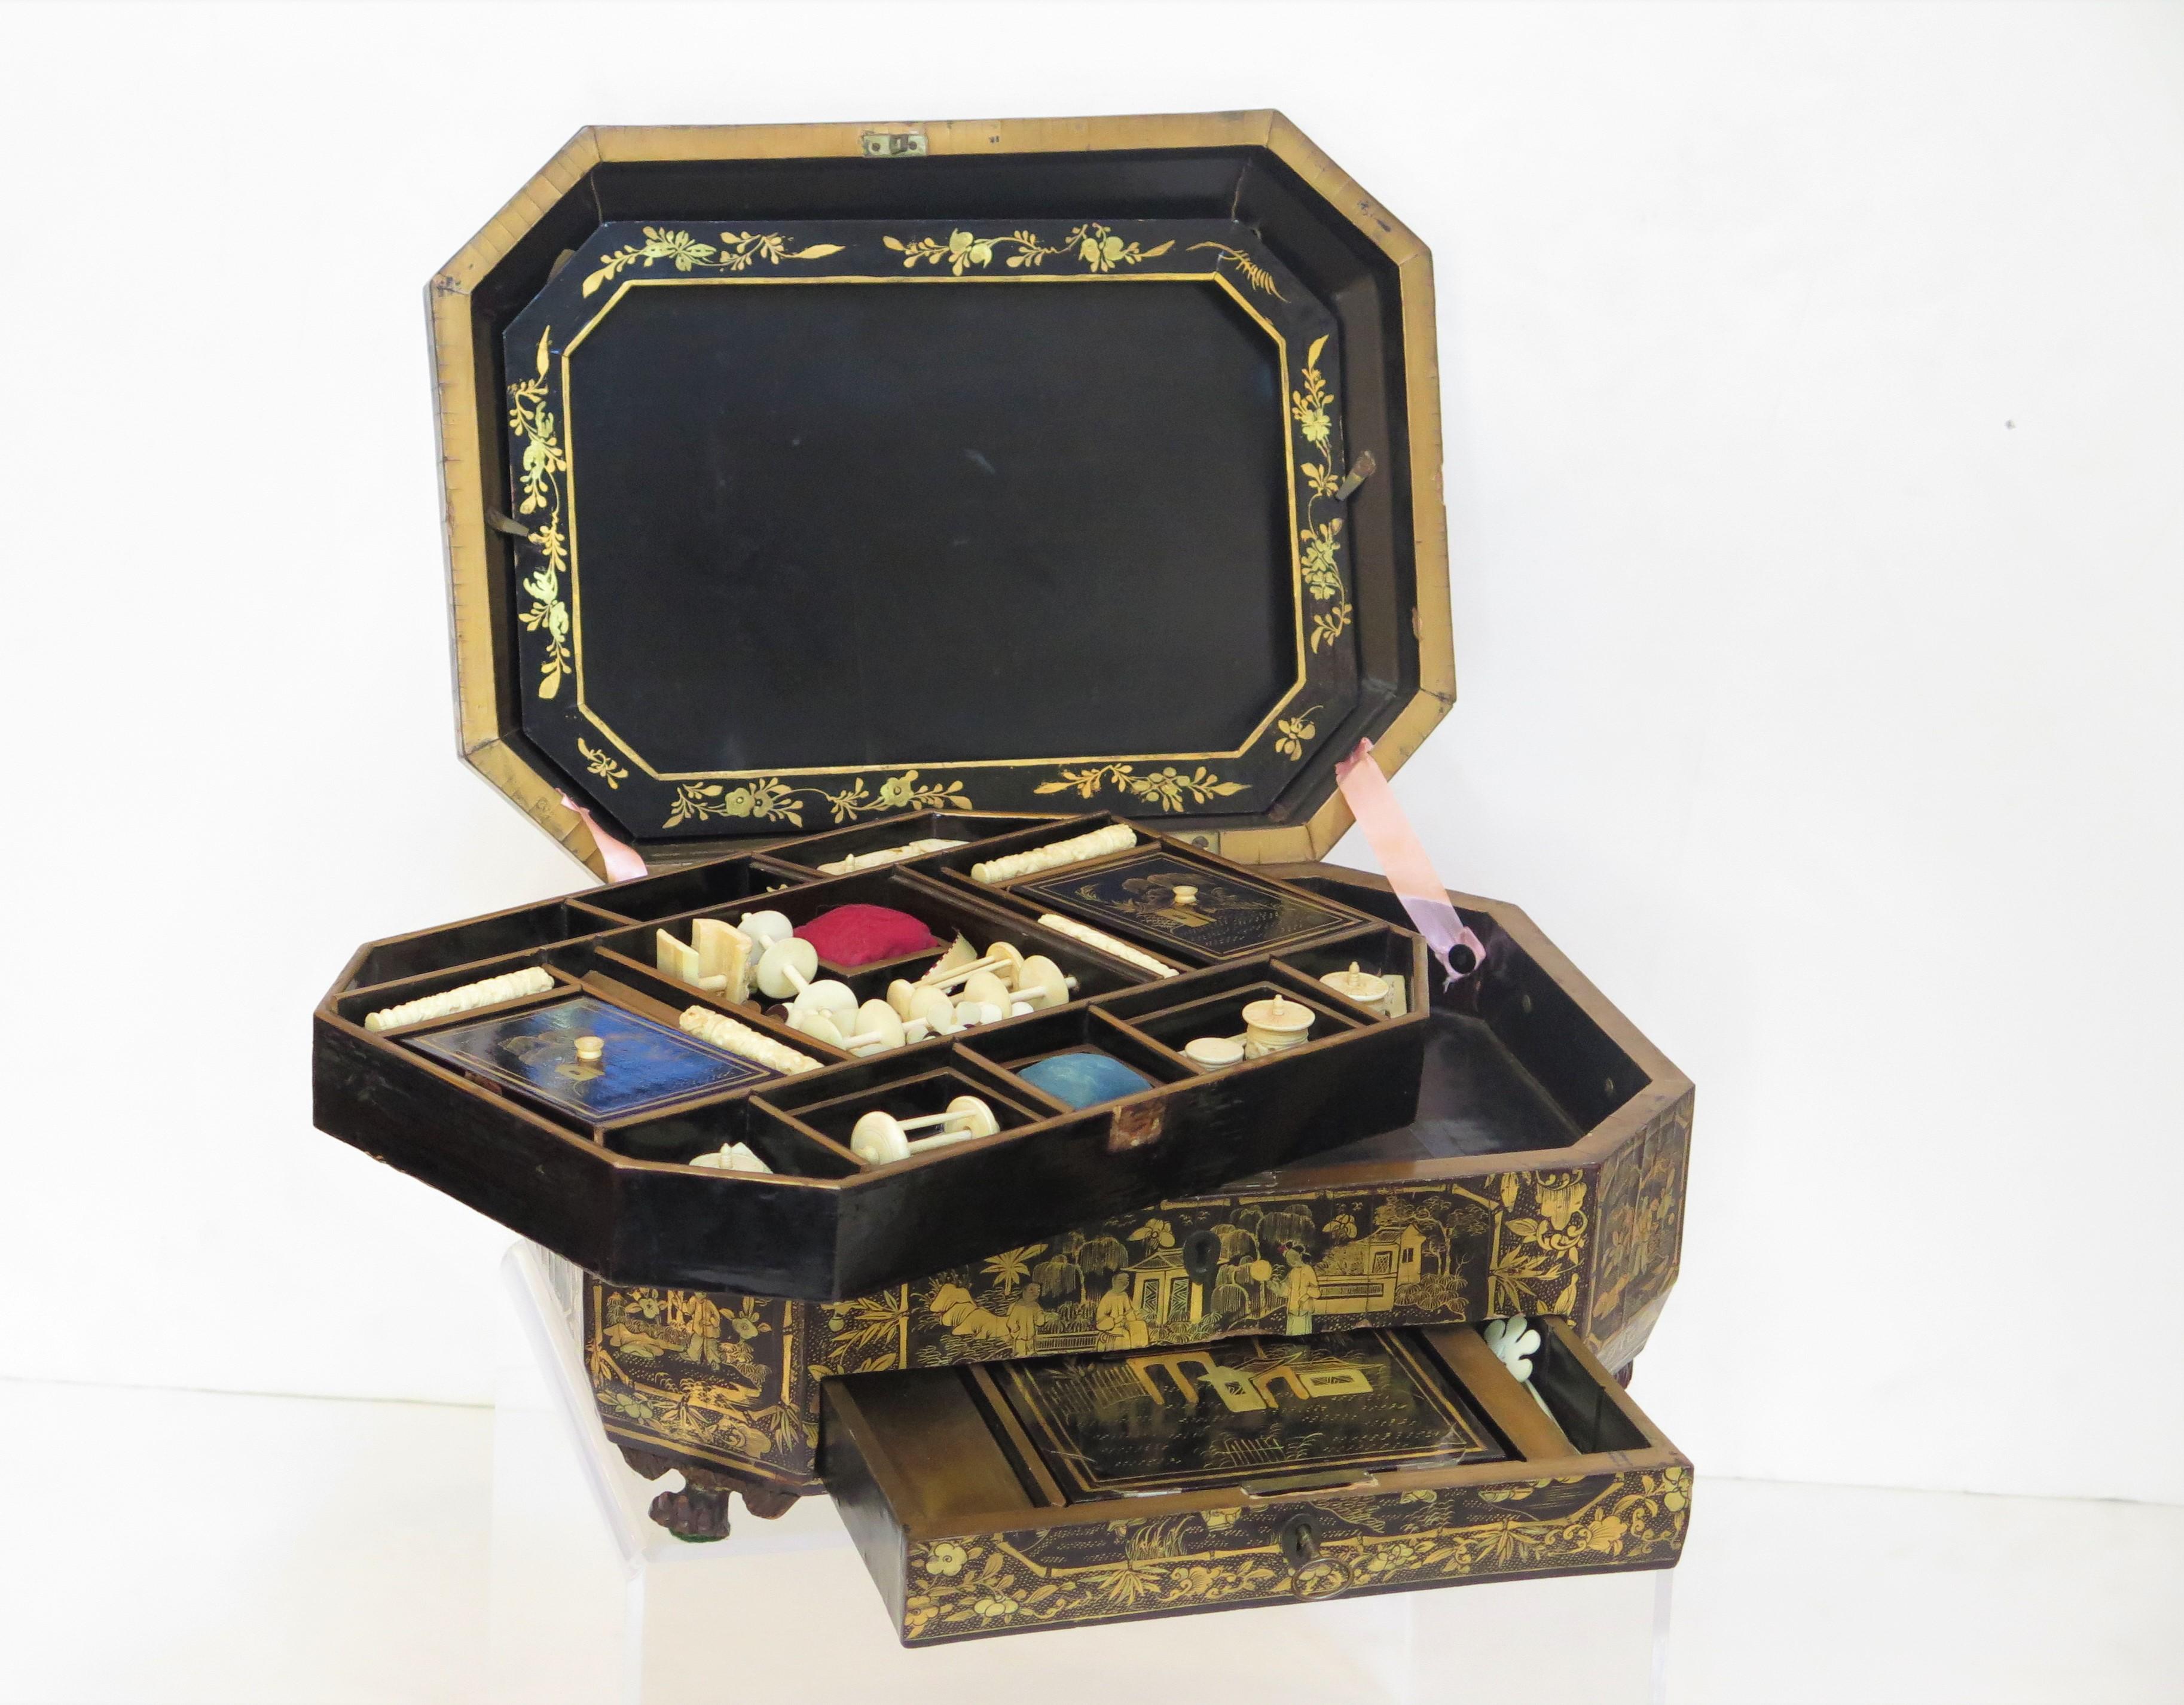 Ealy 19th Century Chinese Export Lacquer Sewing Box For Sale 2